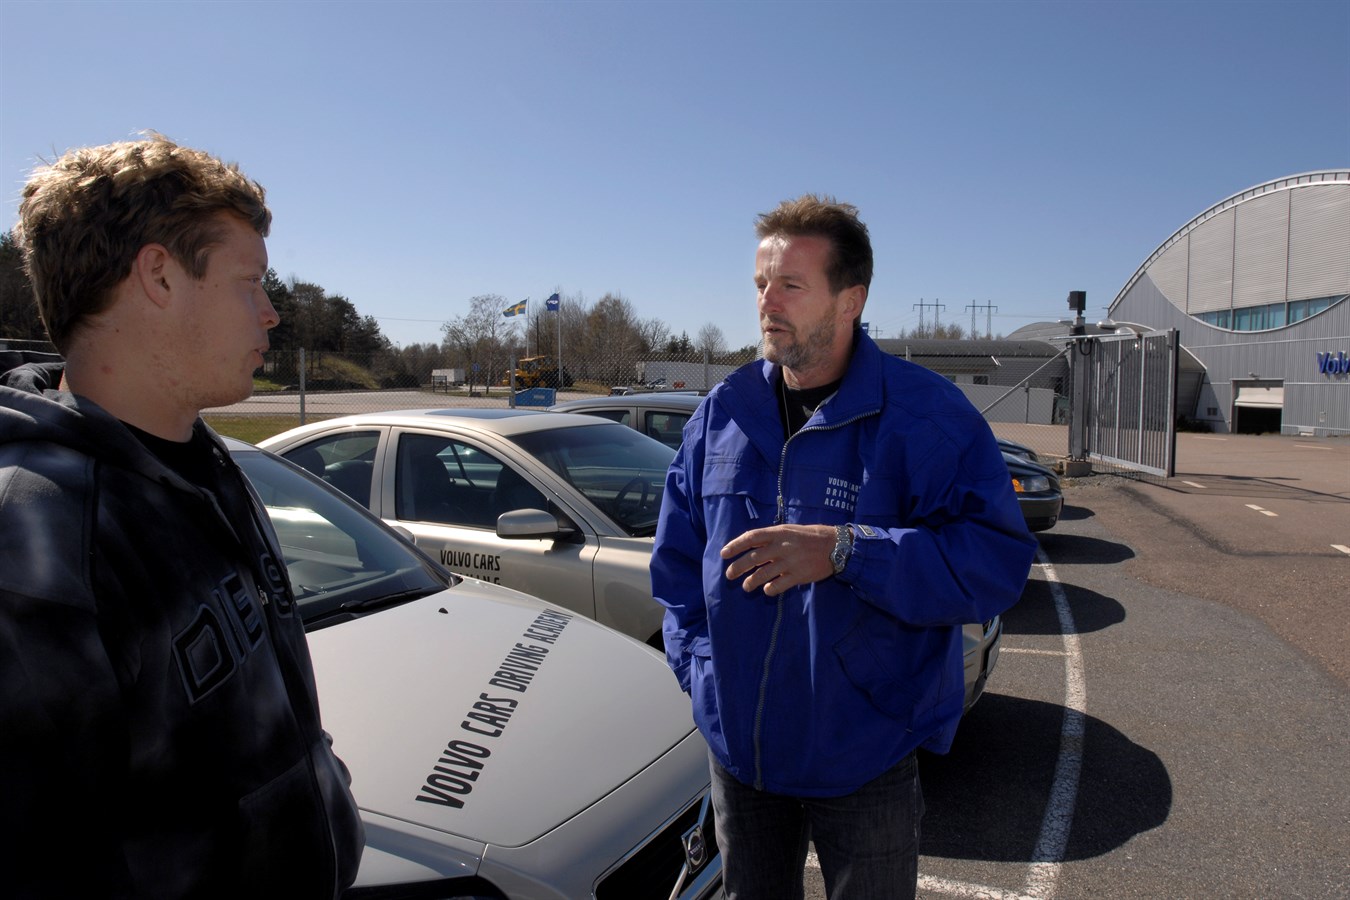 Volvo Car Driving Academy, teaches eco-driving